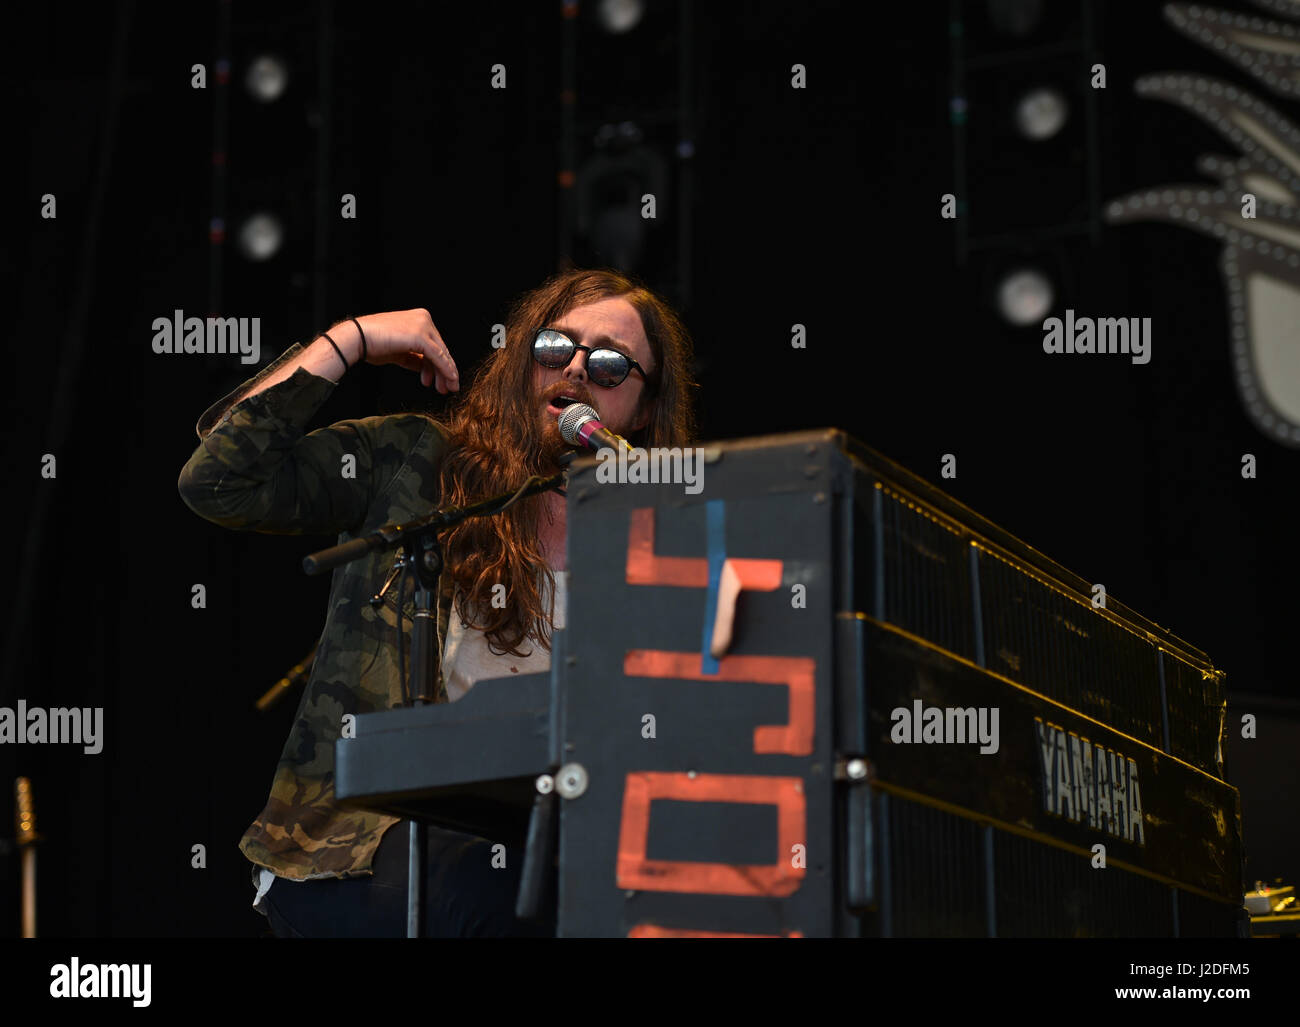 Portsmouth, VIRGINIA, USA. 26th Apr, 2017. J. RODDY WALSTON AND THE BUSINESS, american rock band gets the crowd started at the .to THE PORTSMOUTH PAVILION in PORTSMOUTH, VIRGINIA on 26 APRIL 2017. © Jeff Moore 2017 Credit: Jeff Moore/ZUMA Wire/Alamy Live News Stock Photo